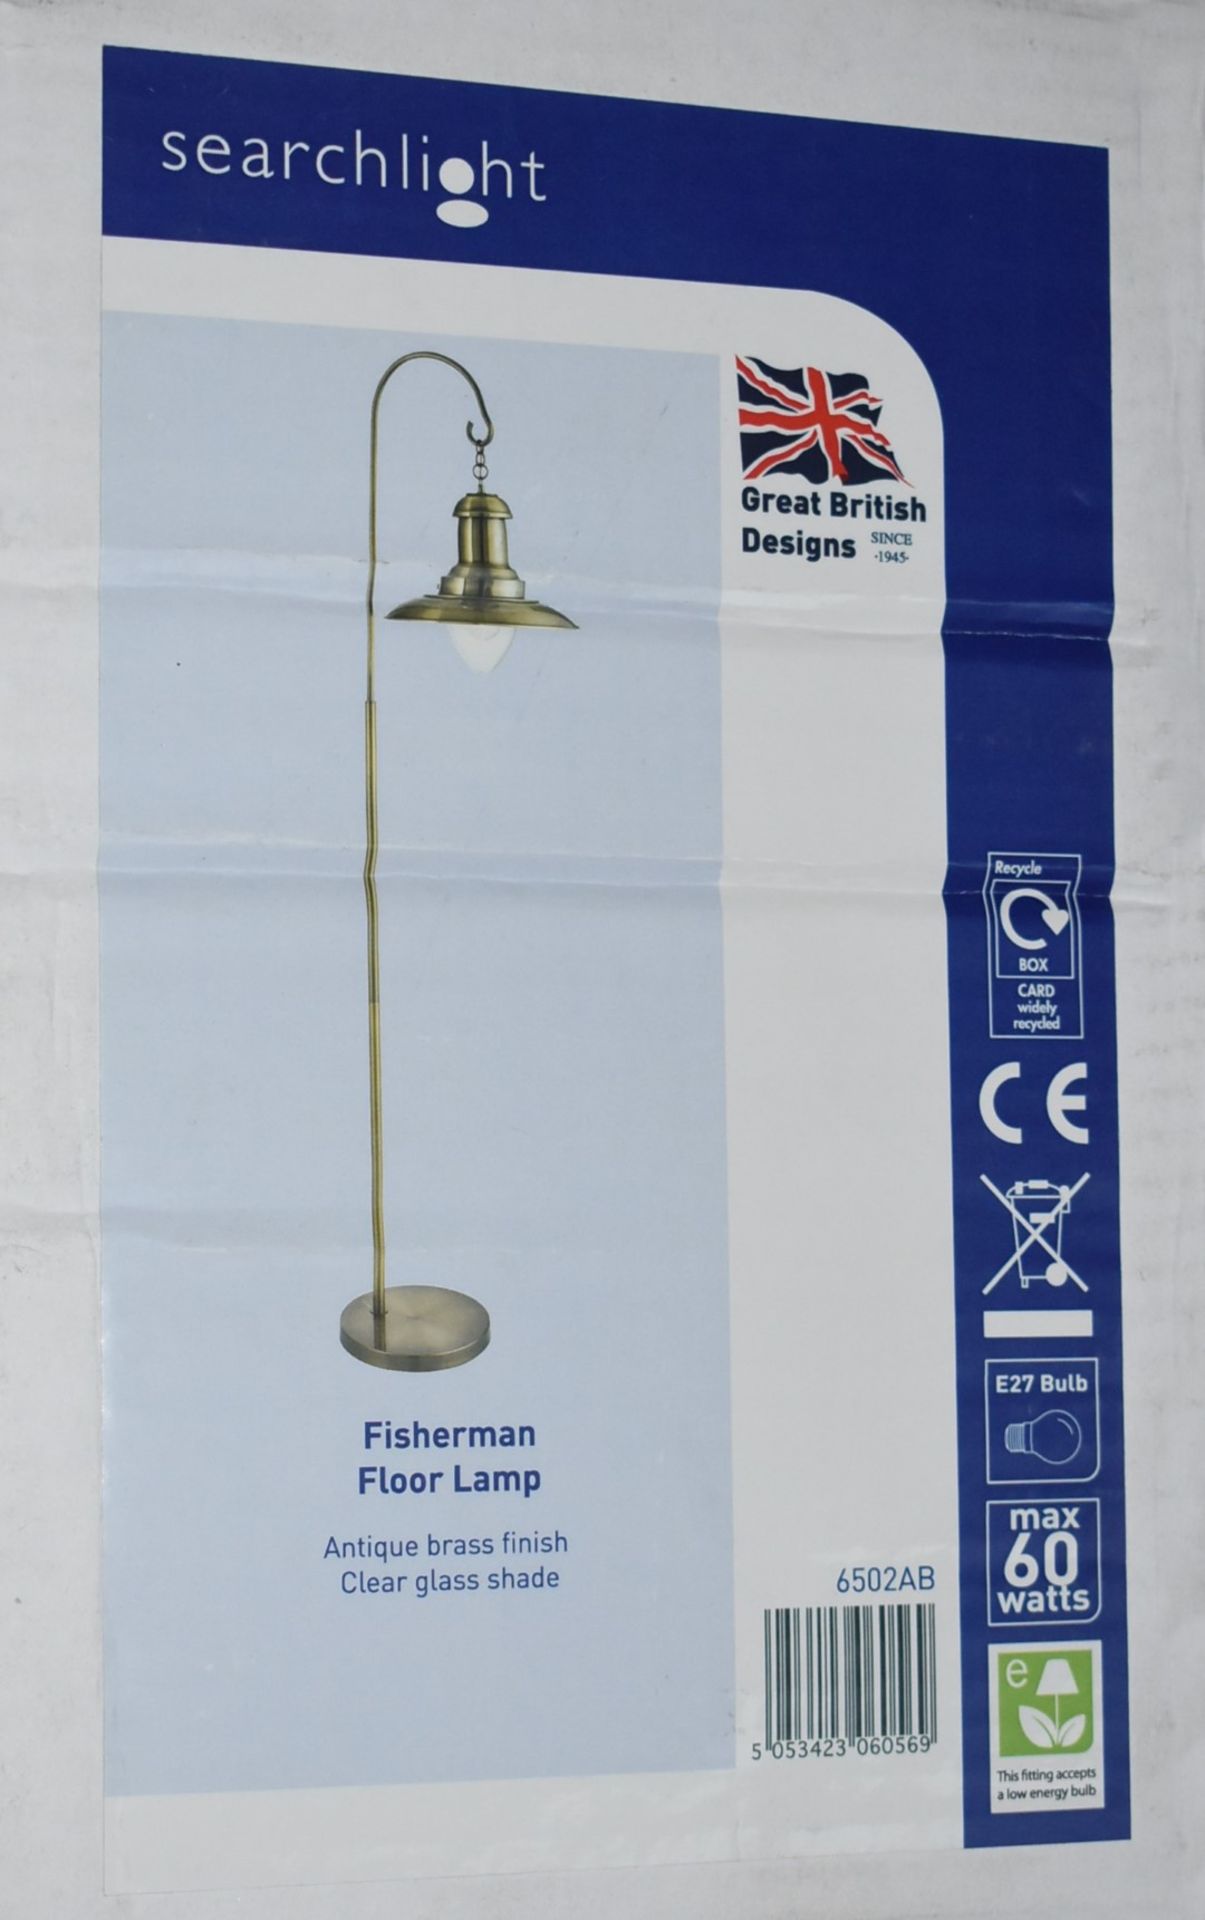 1 x Searchlight Fisherman Floor Lamp With an Antique Brass Finish and Glass Shade - Height 161 cms - Image 2 of 5